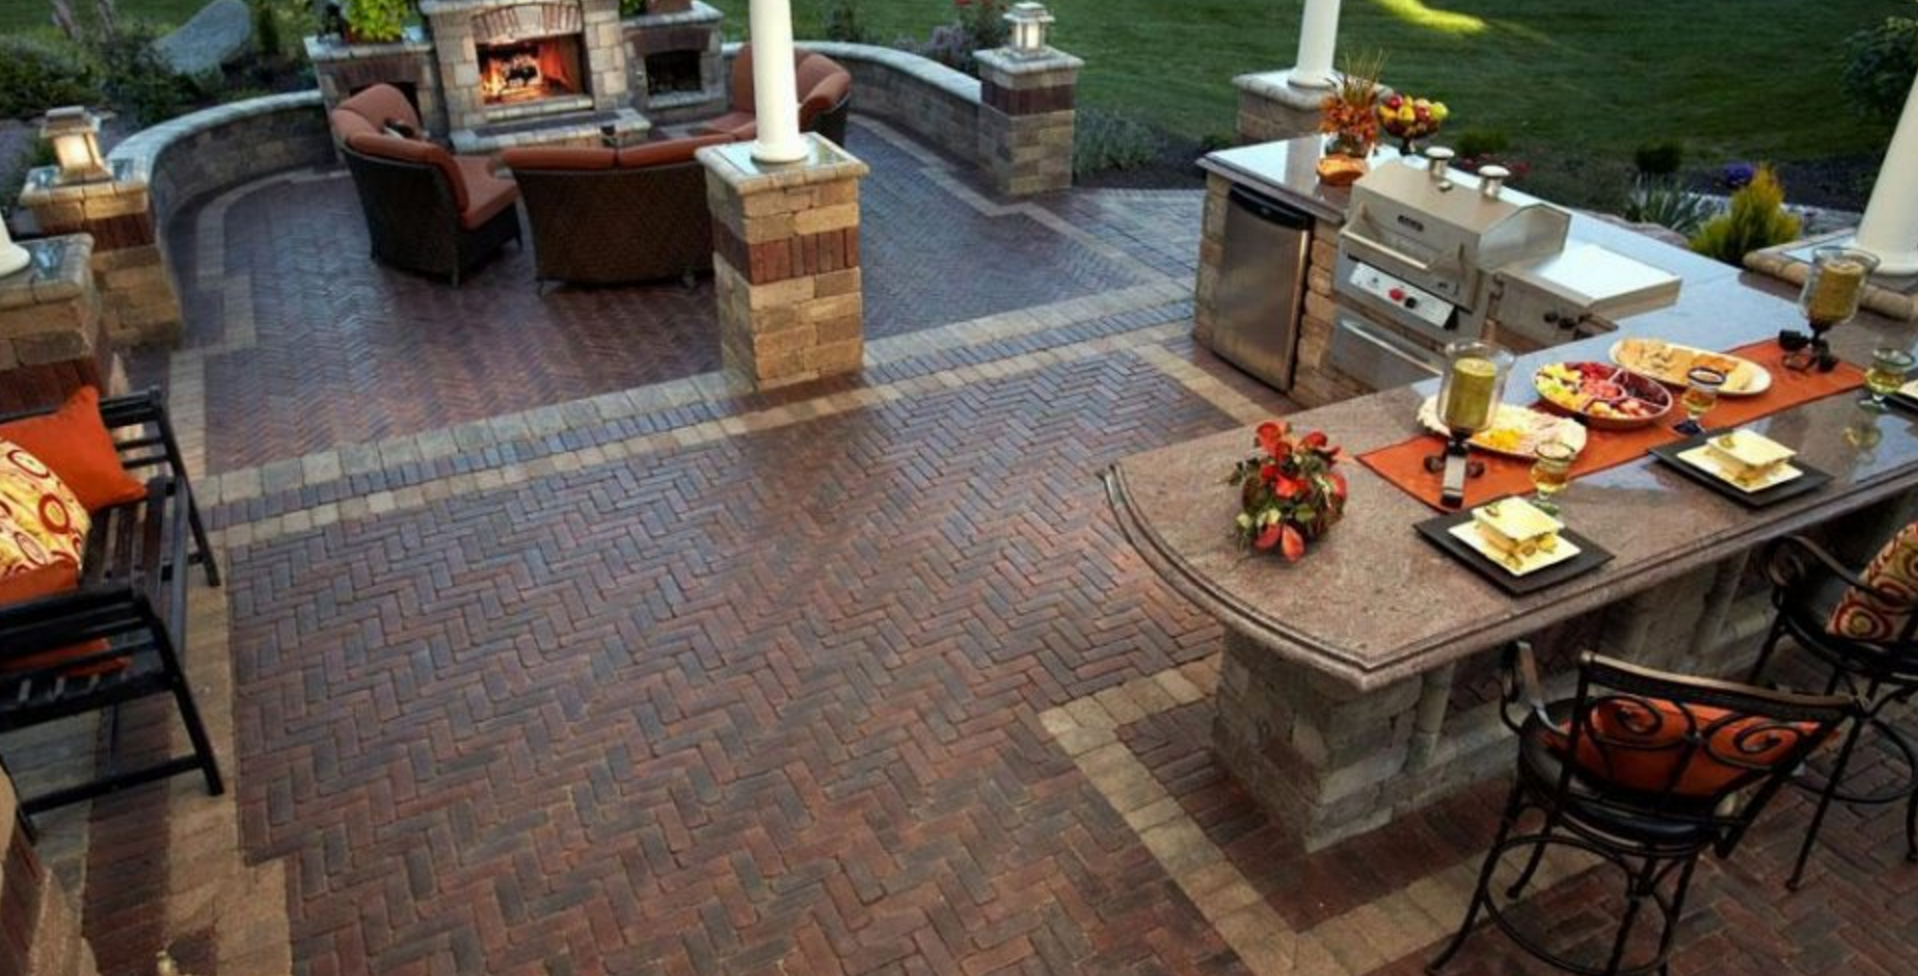 Landscaping ideas for NY and NJ: Outdoor fireplaces, outdoor kitchens